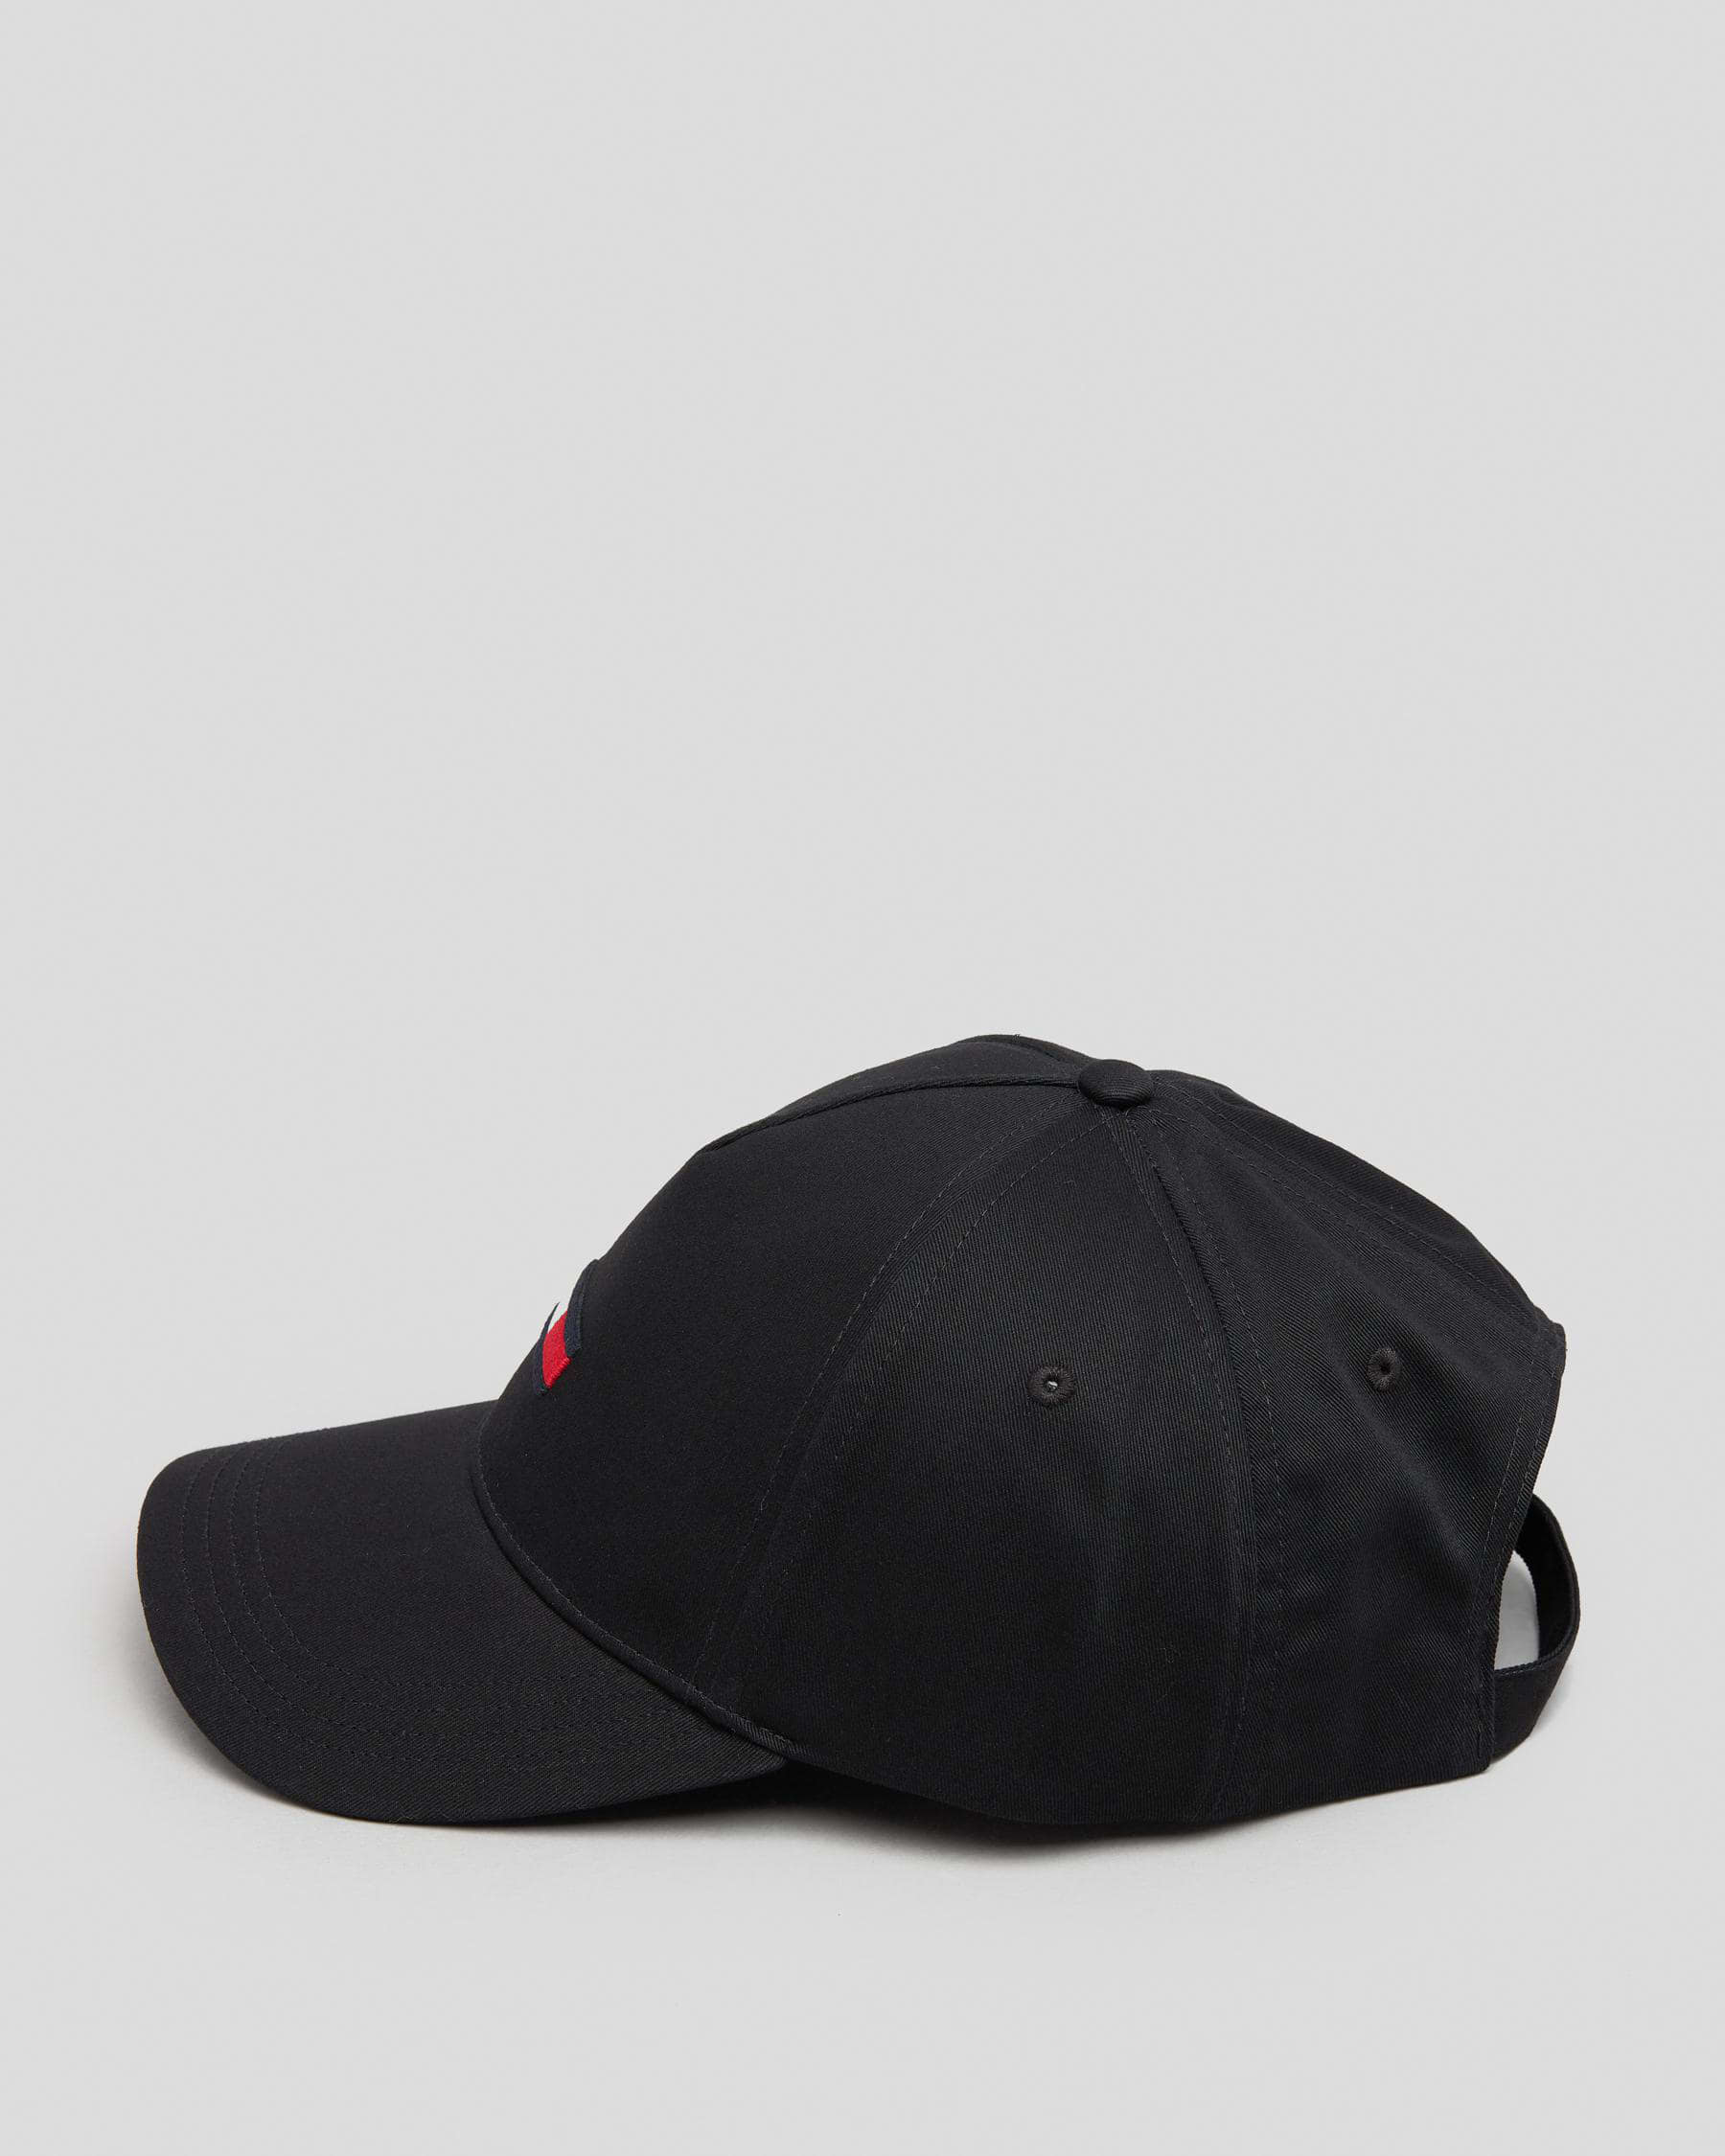 In Black Tommy Easy Cap Shipping - FREE* Returns United Beach & City Hilfiger TJM States - Flag